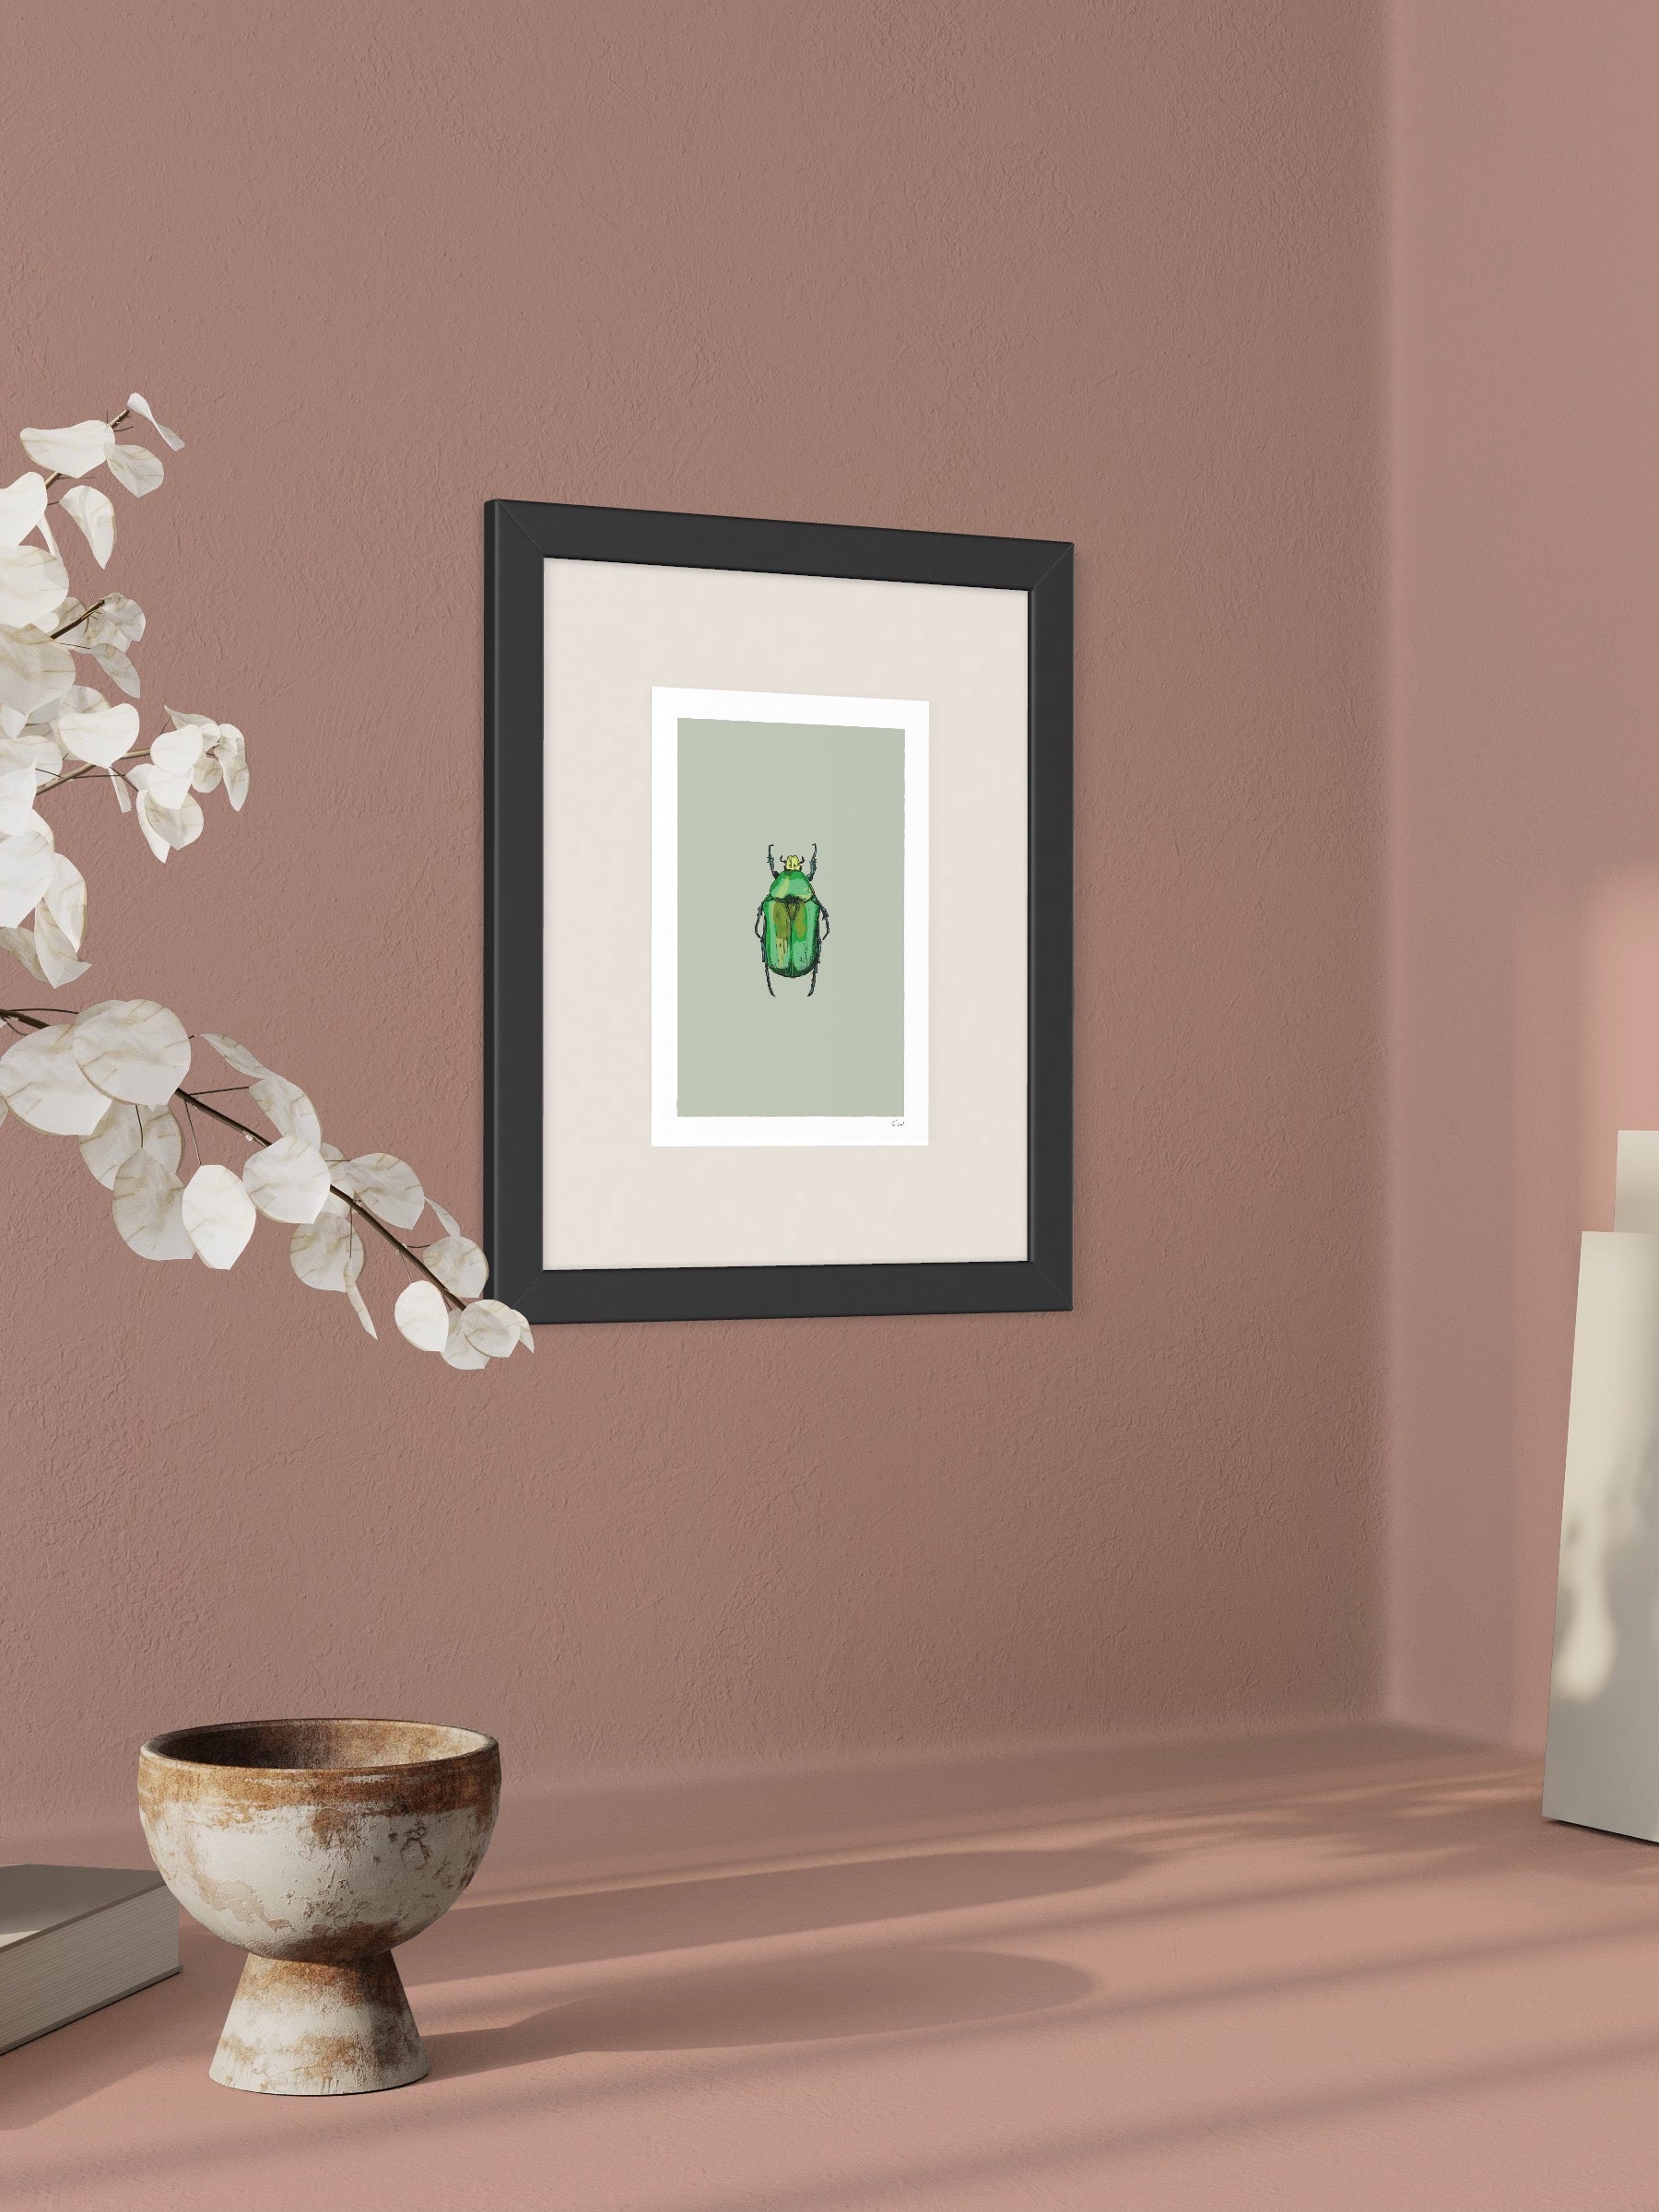 This image shows a giclee wall art print by Tom Laird Illustration of a Rose Chafer Beetle, framed in a beautiful living room with tasteful modern home decor. This art print is available from Tom Laird Illustration in various sizes.